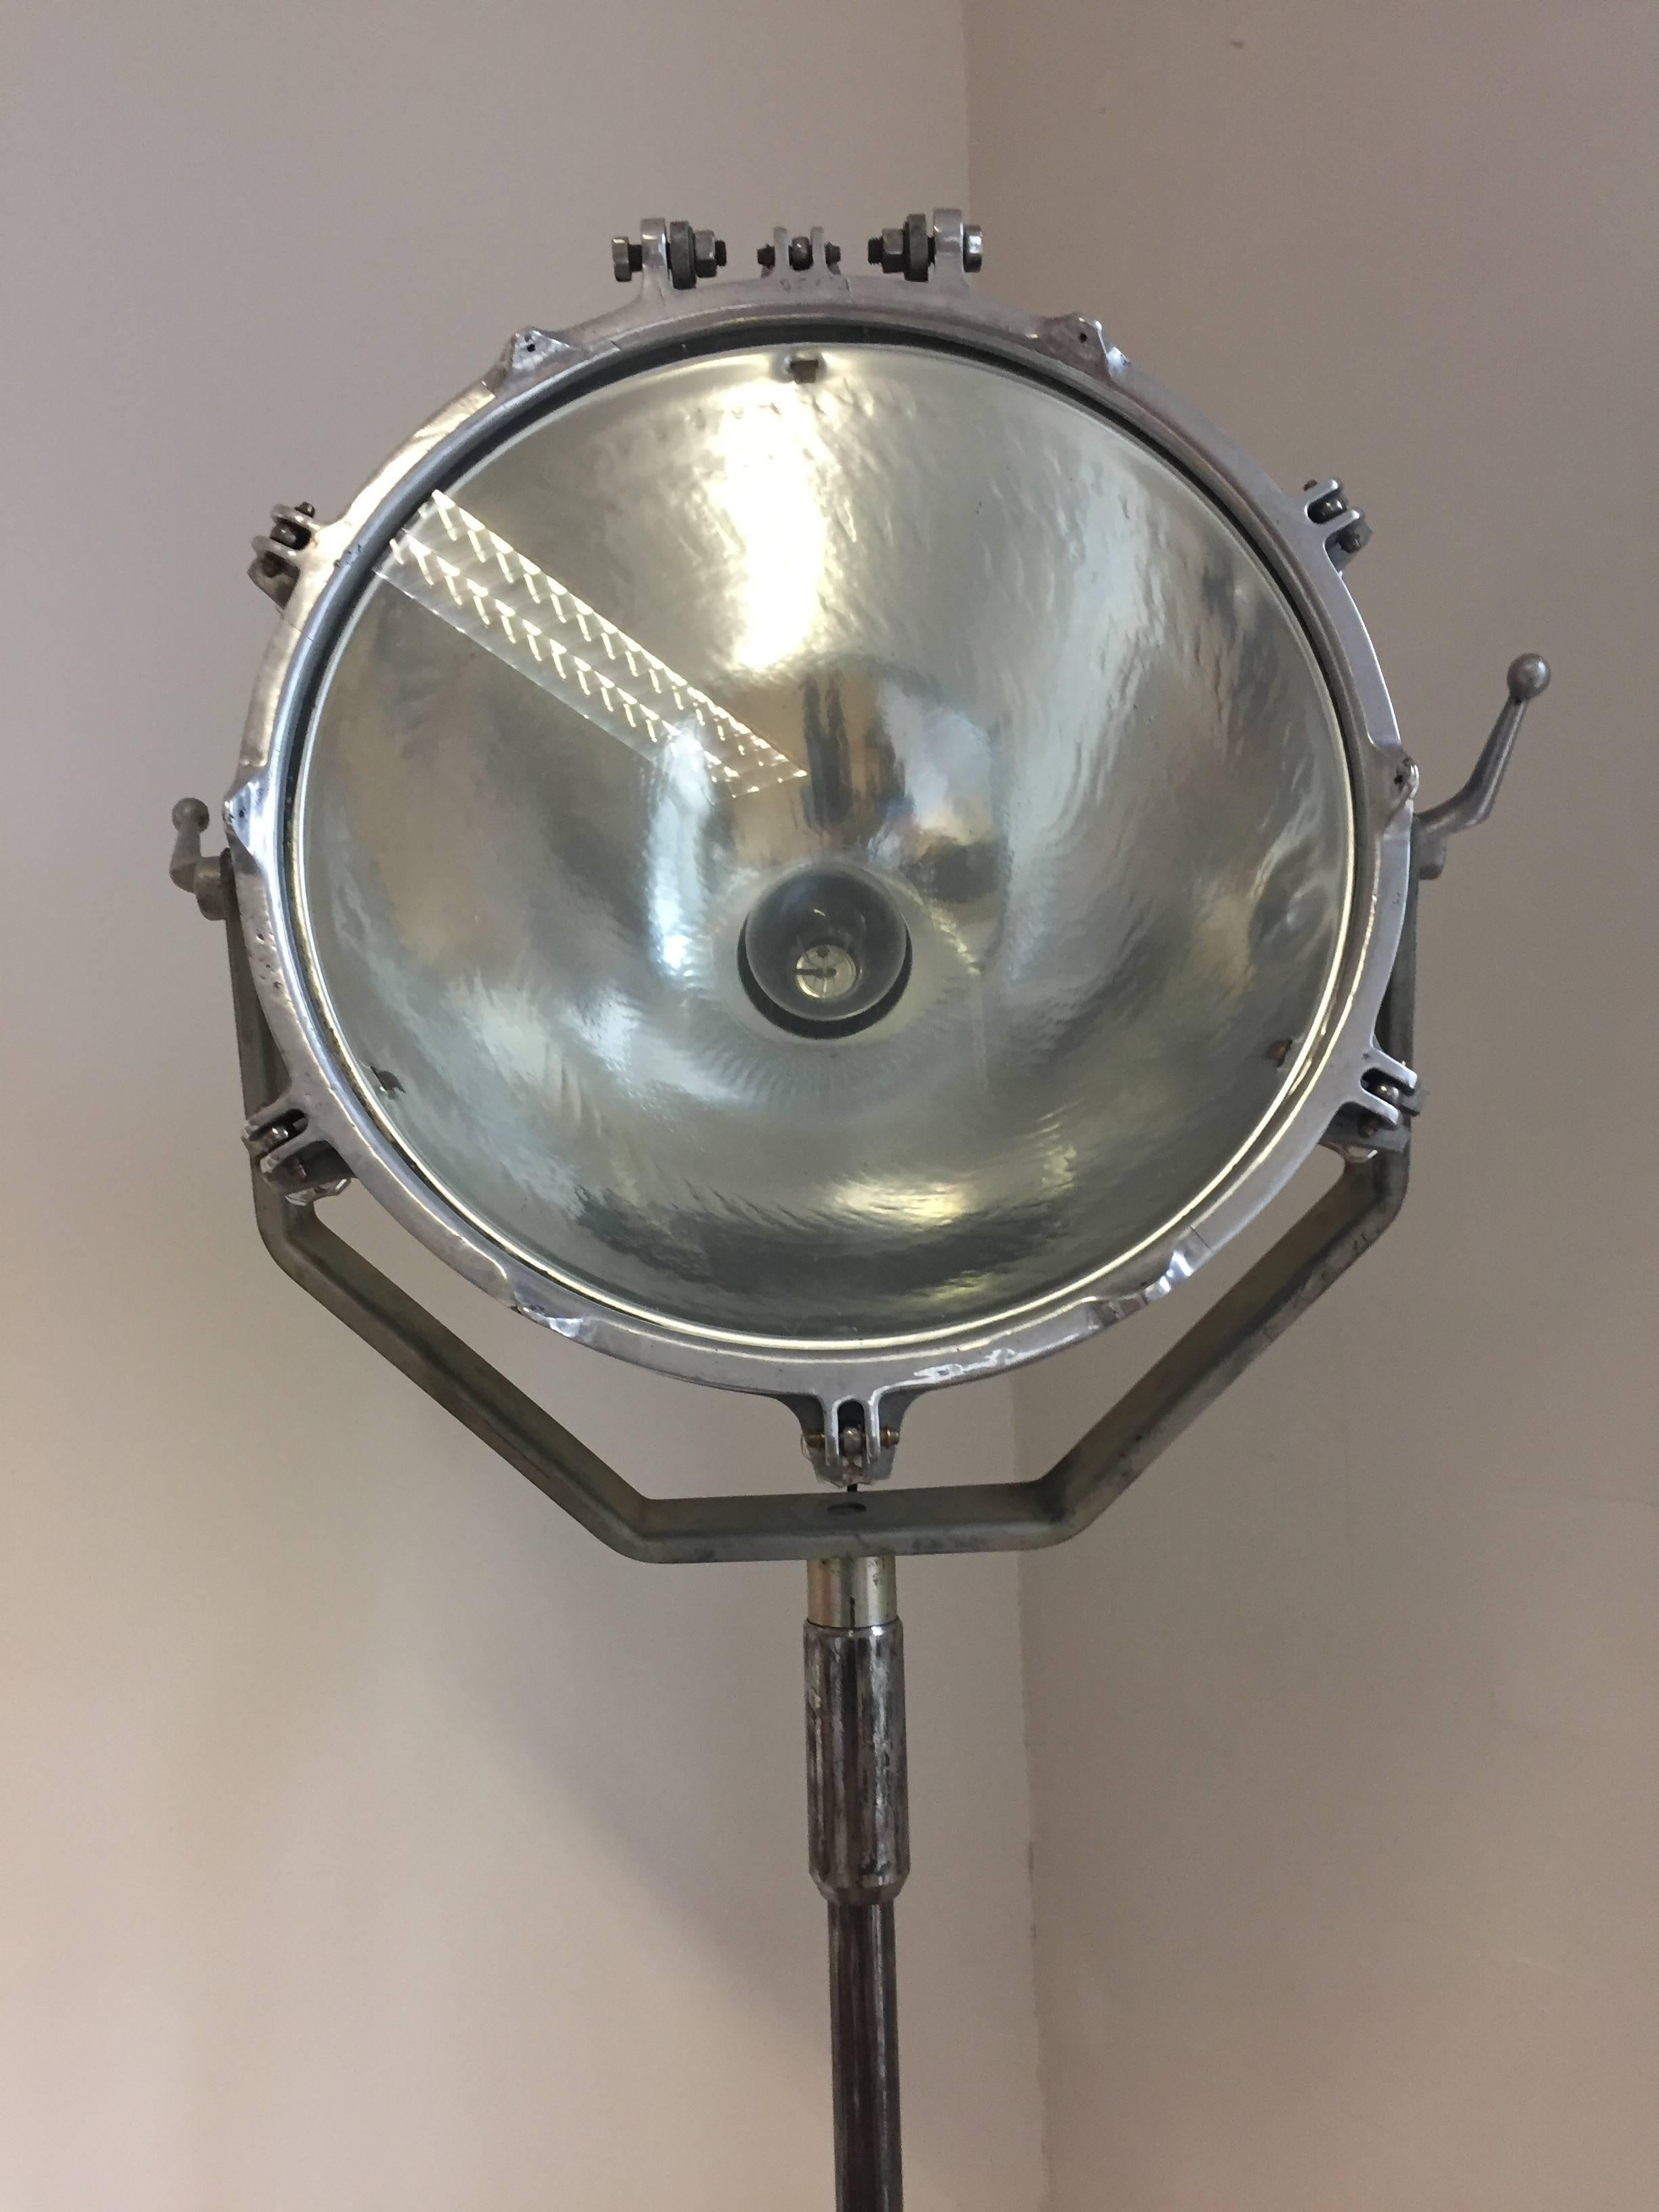 Spotlight in silver Aluminium and chrome, produced by Brandt, Paris, type V2821, first half of the 20th century, original condition except new wire, twisted cord black, very good vintage condition, pull-out bar, 220cm height in total having the bar